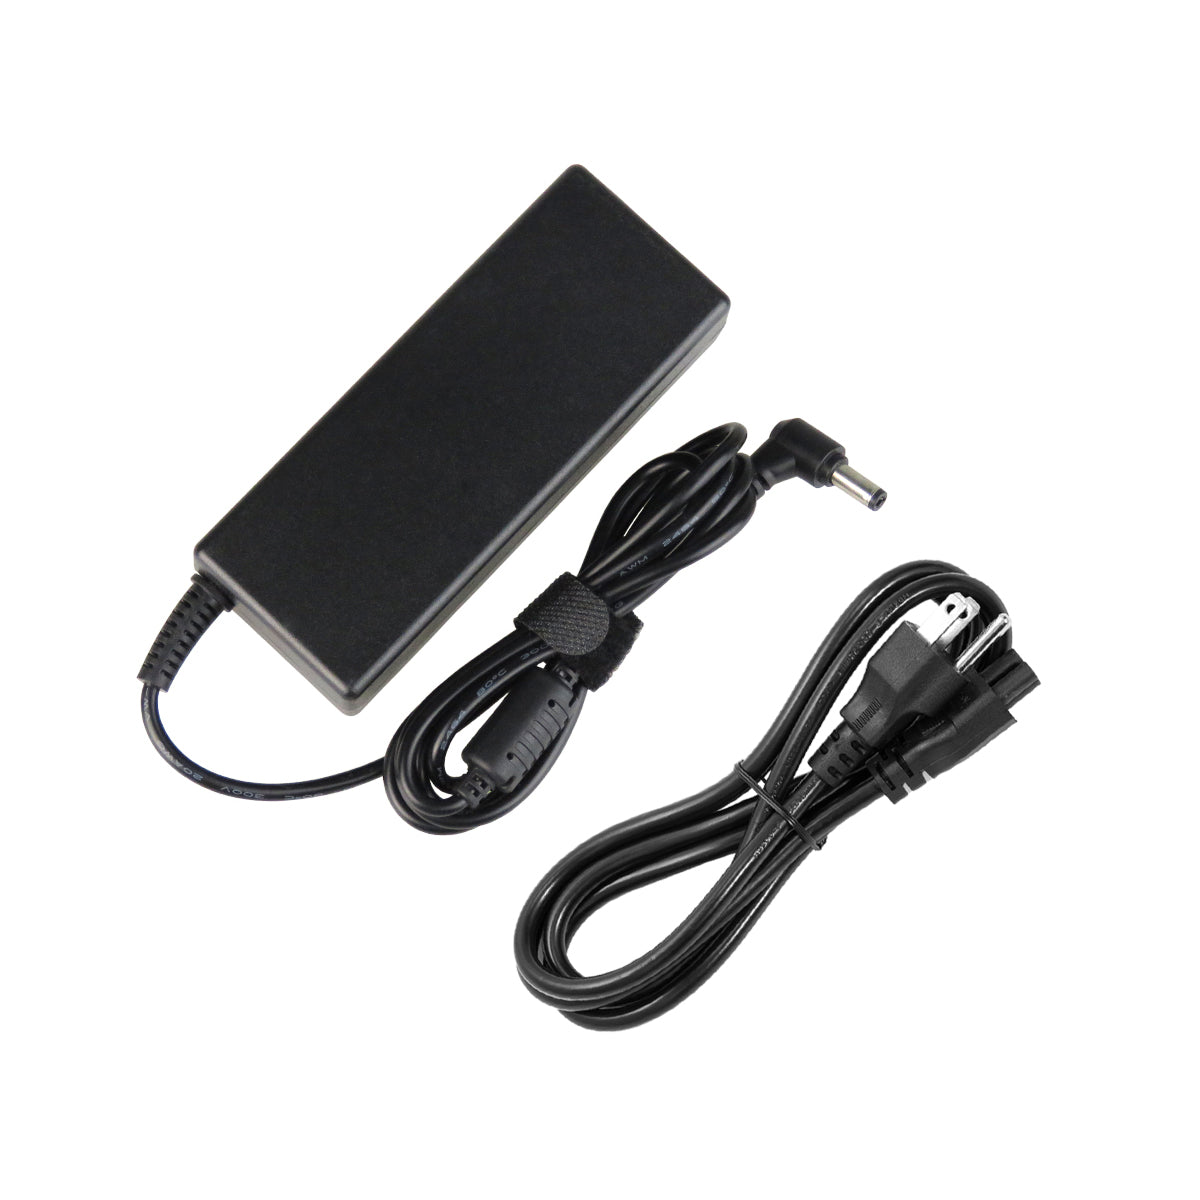 AC Adapter Charger for ASUS K73E Laptop.